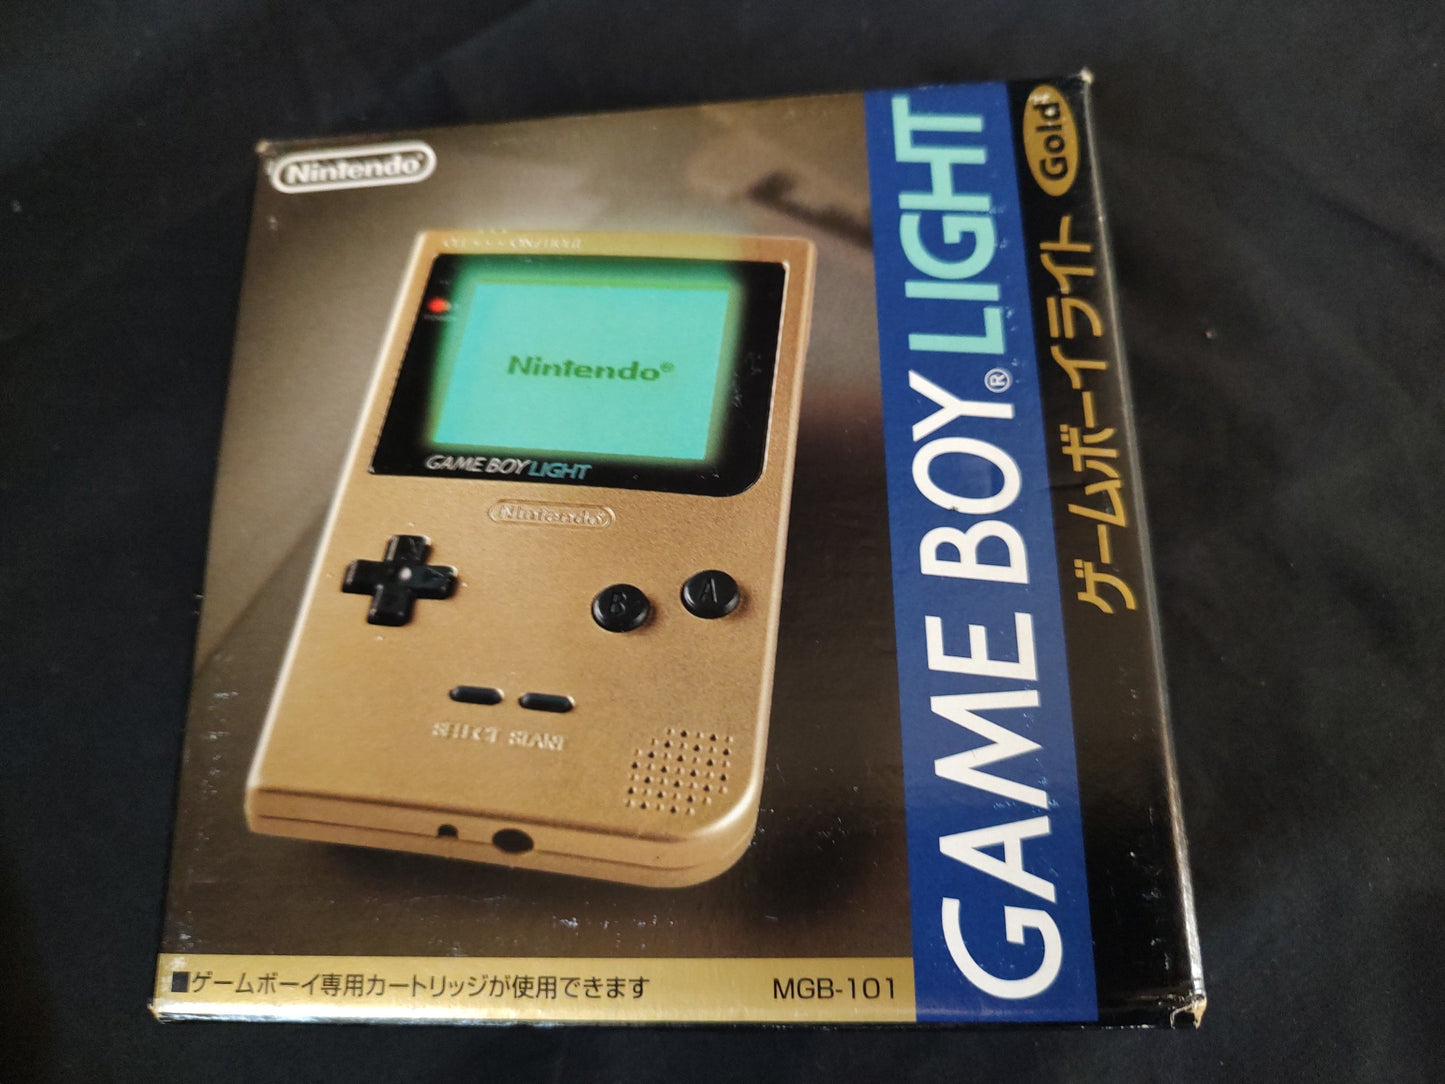 Nintendo Game boy Light Gold color console MGB-101,Manual, and box set-f0903-